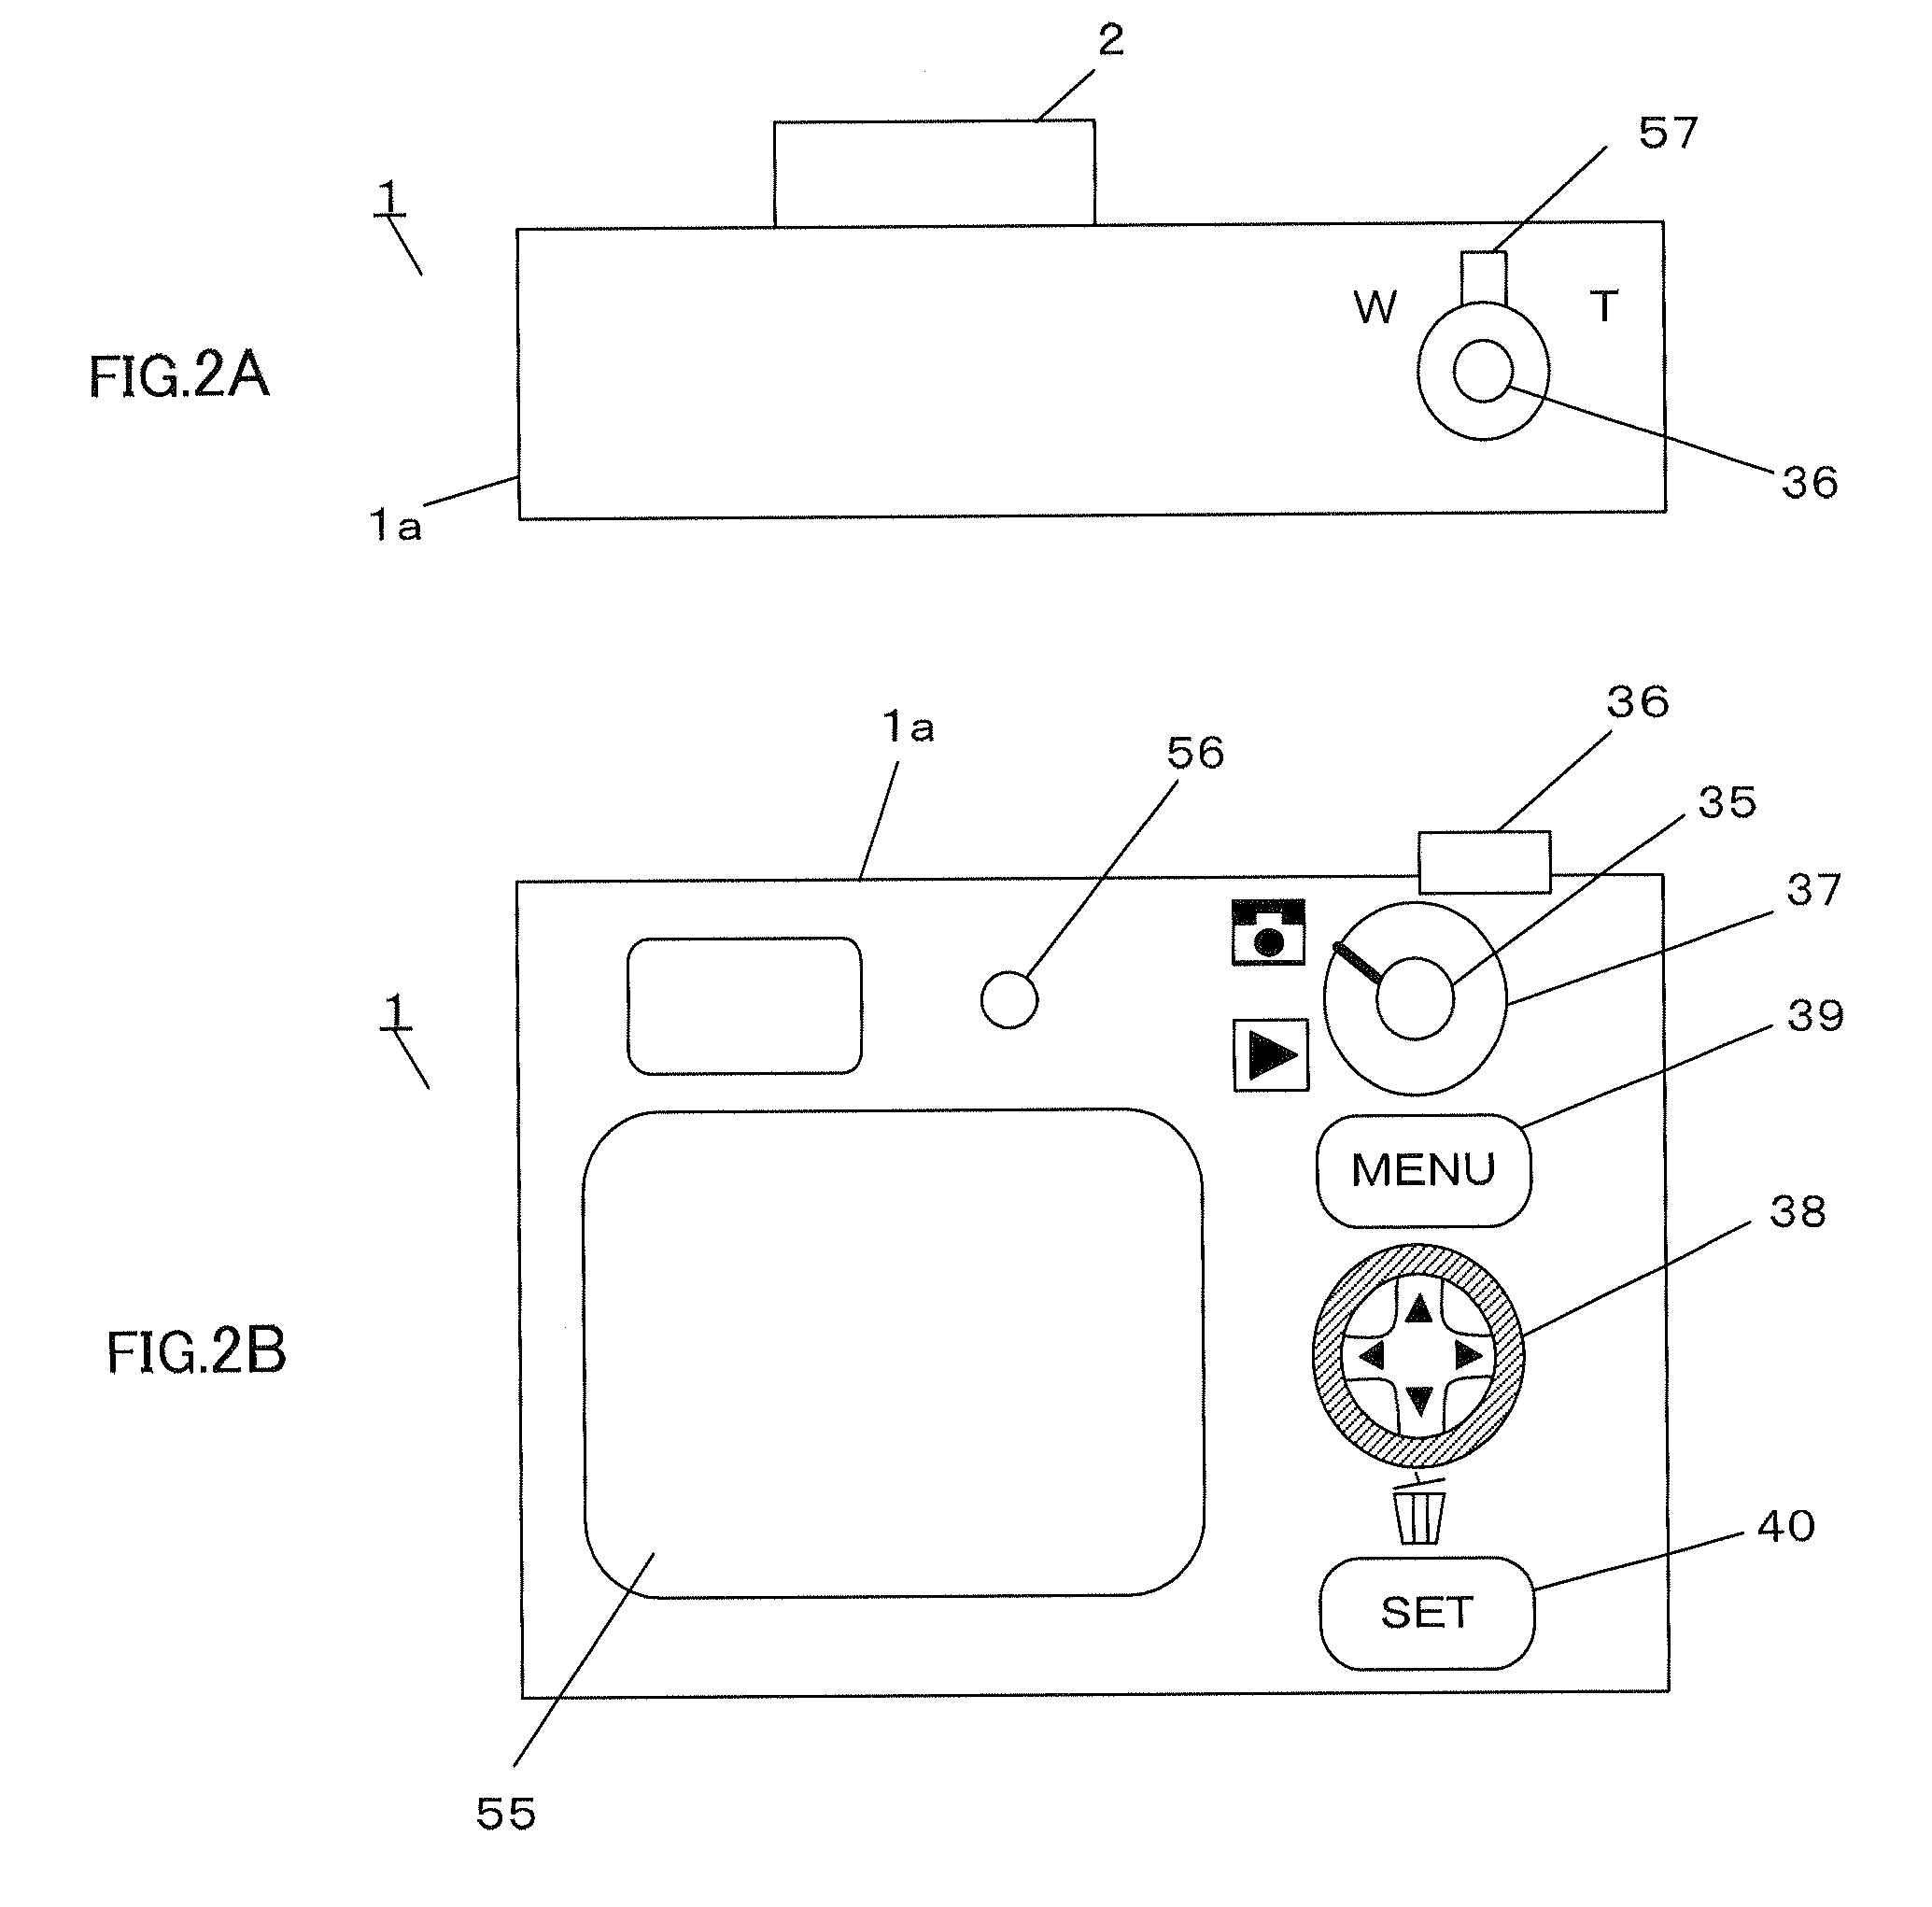 Image pickup apparatus to control an exposure time based on motion of a detected optical image